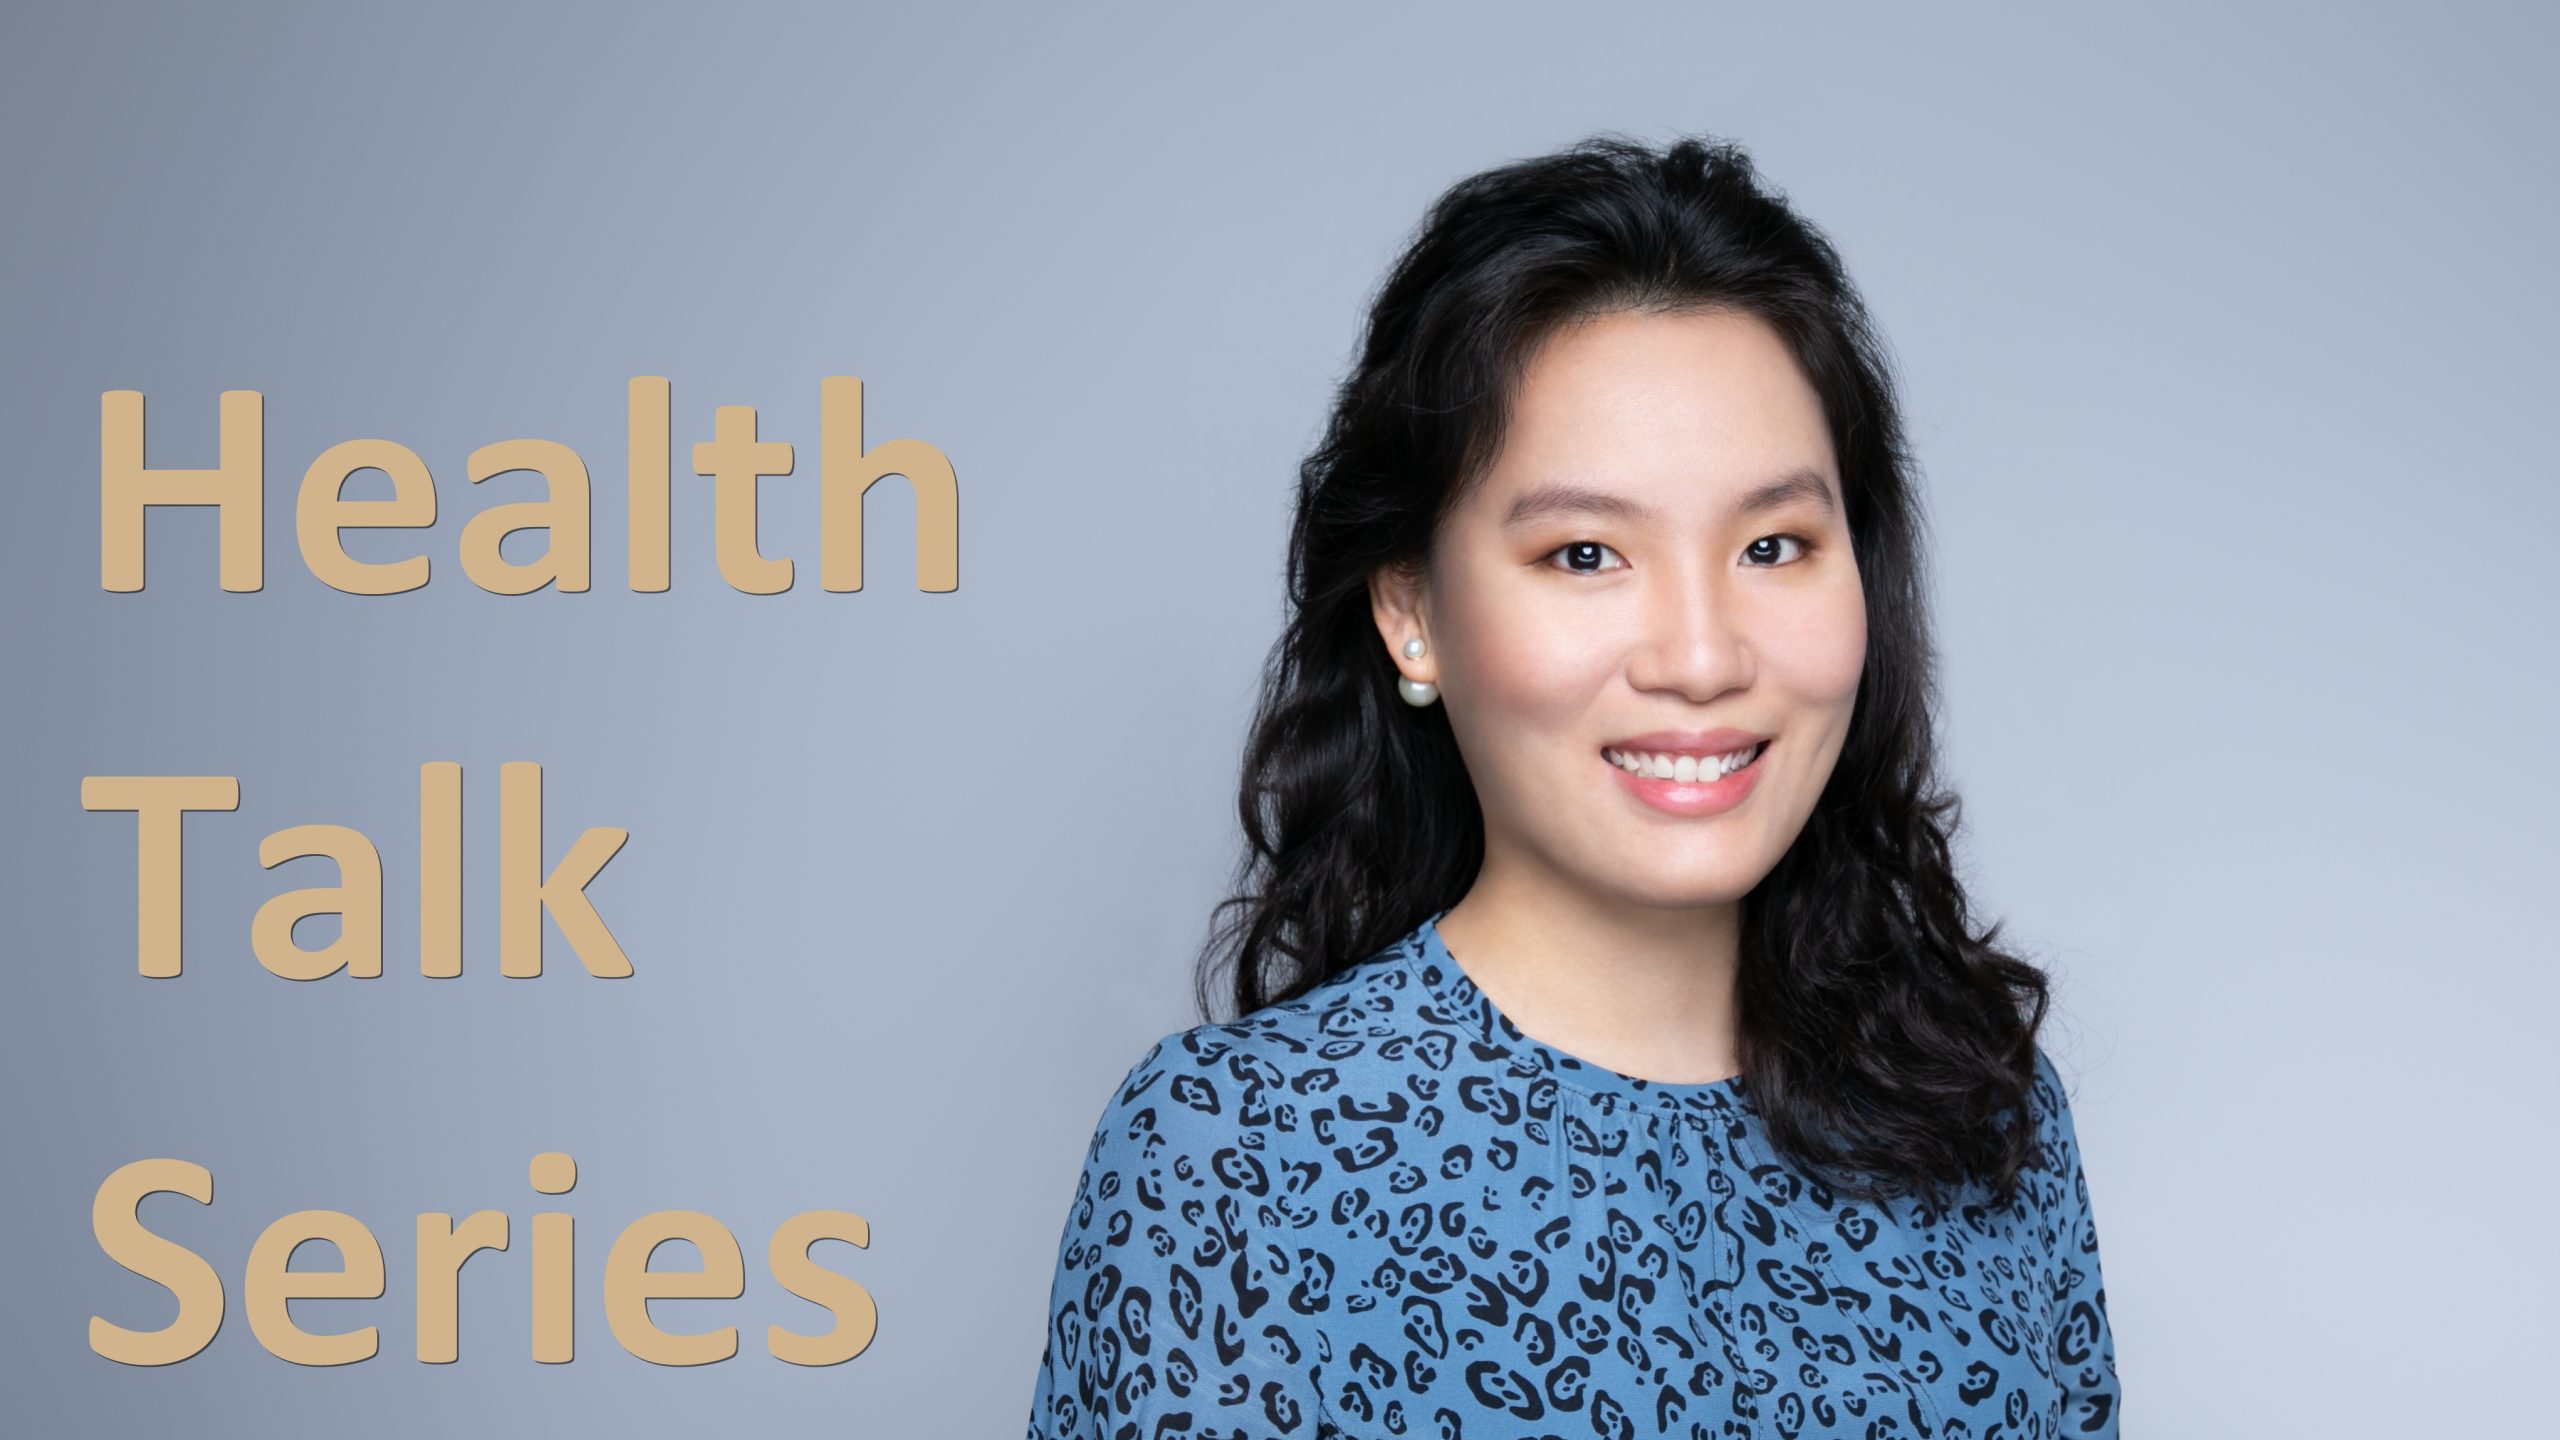 Connected to Share Health Talk Series by Dr Michelle Lo